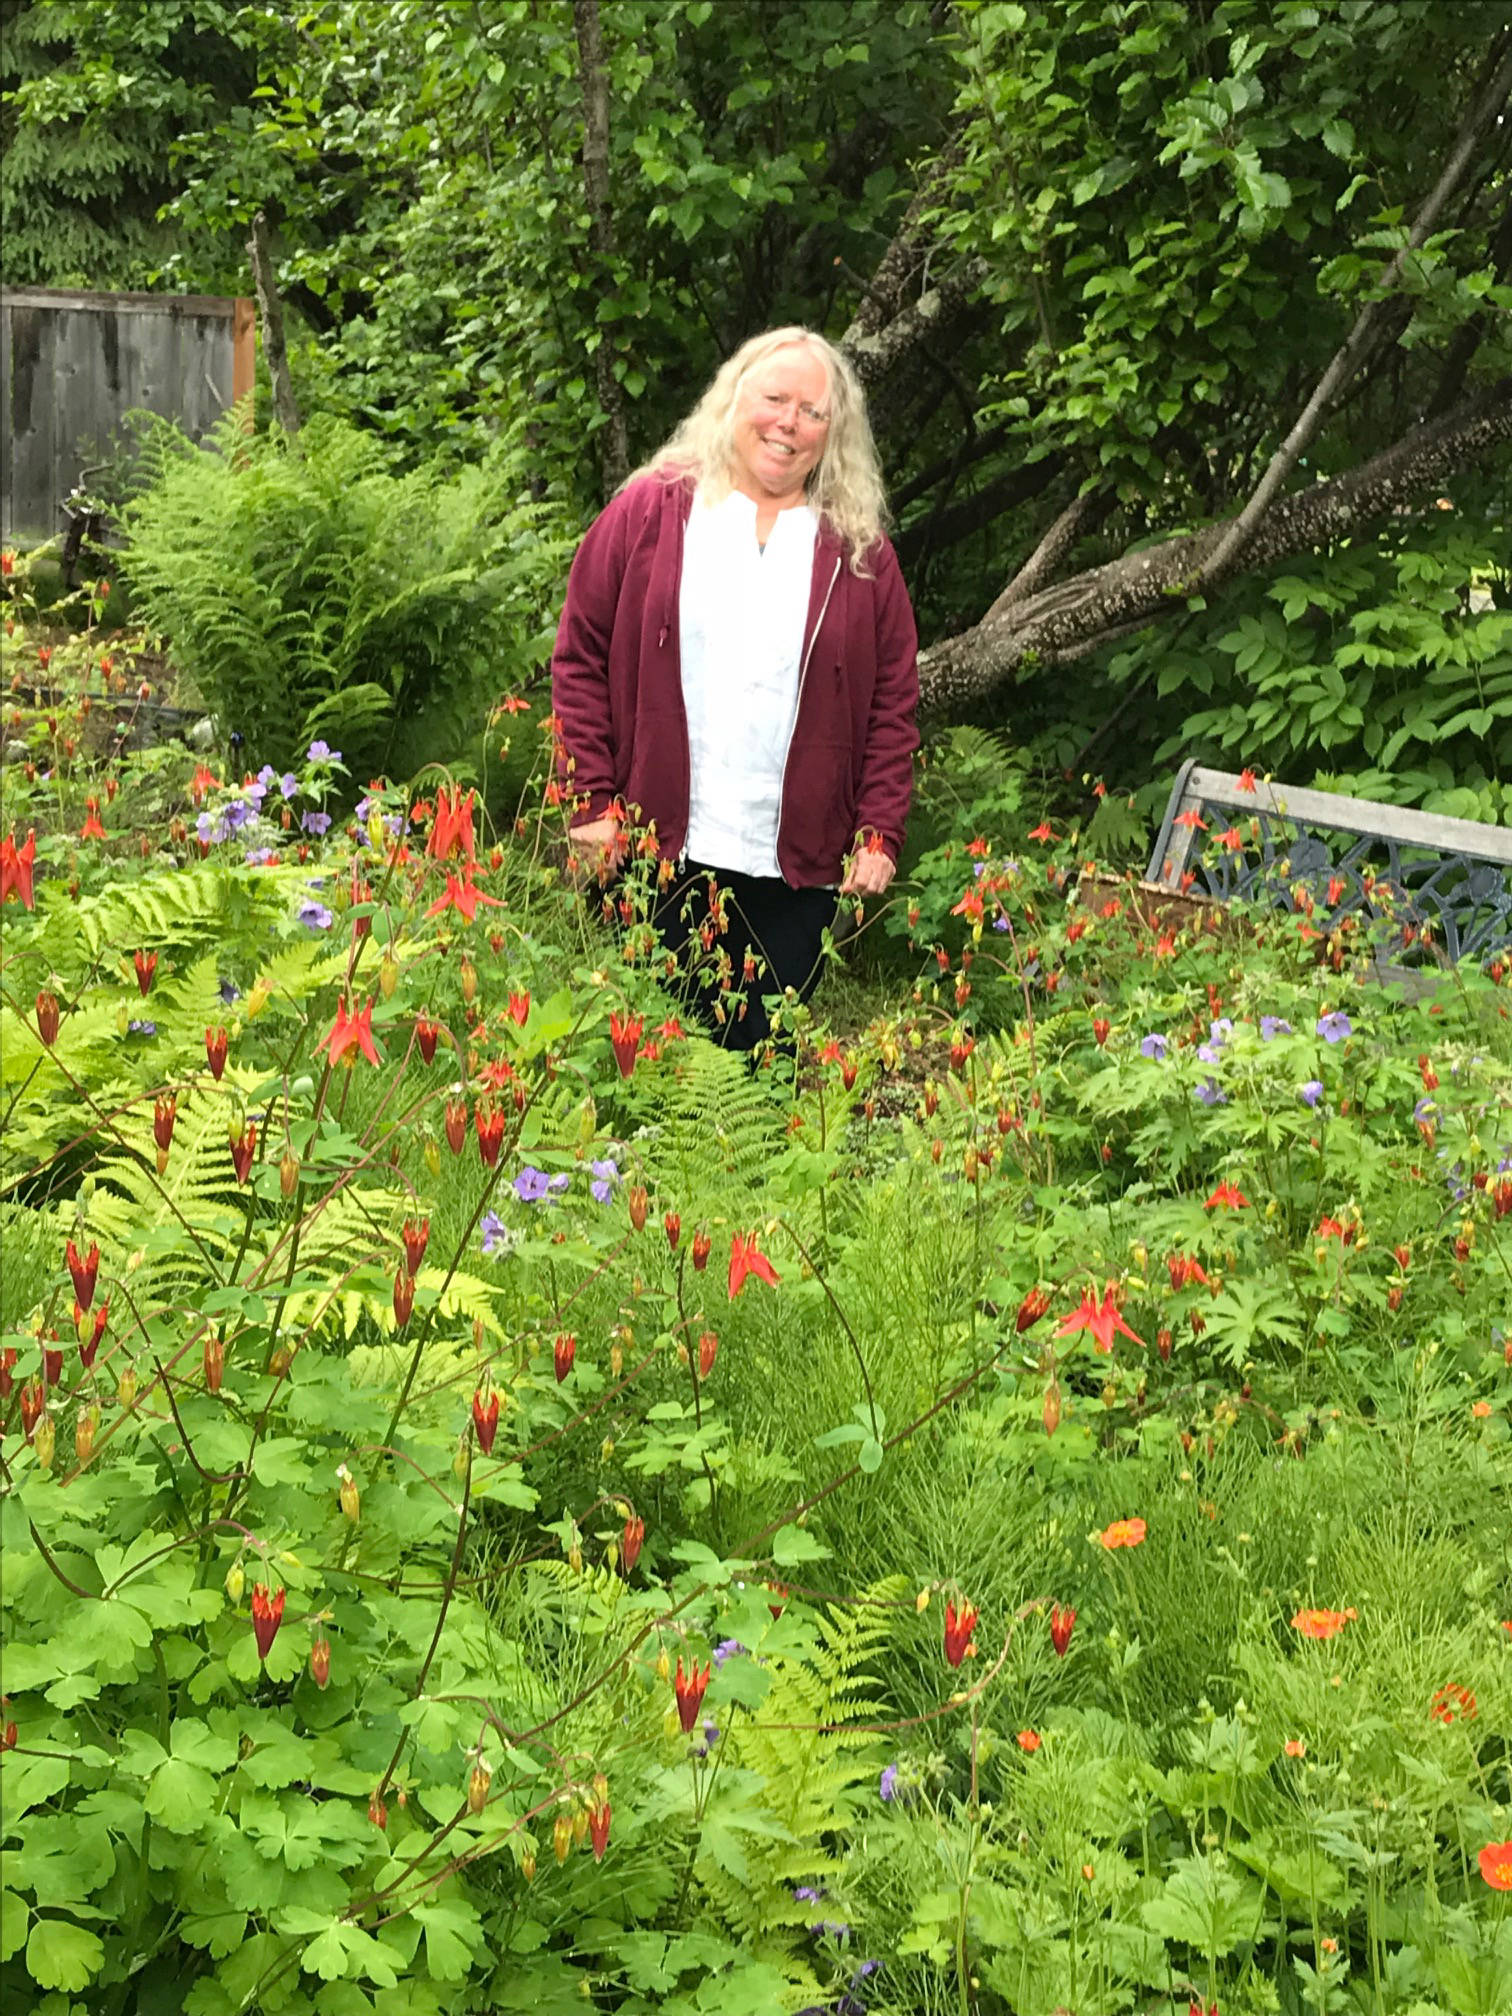 Judy Flora stands among columbine in Homer, Alaska, on June 29, 2018, her penchant for the flowers realized. (Photo by Rosemary Fitzpatrick)